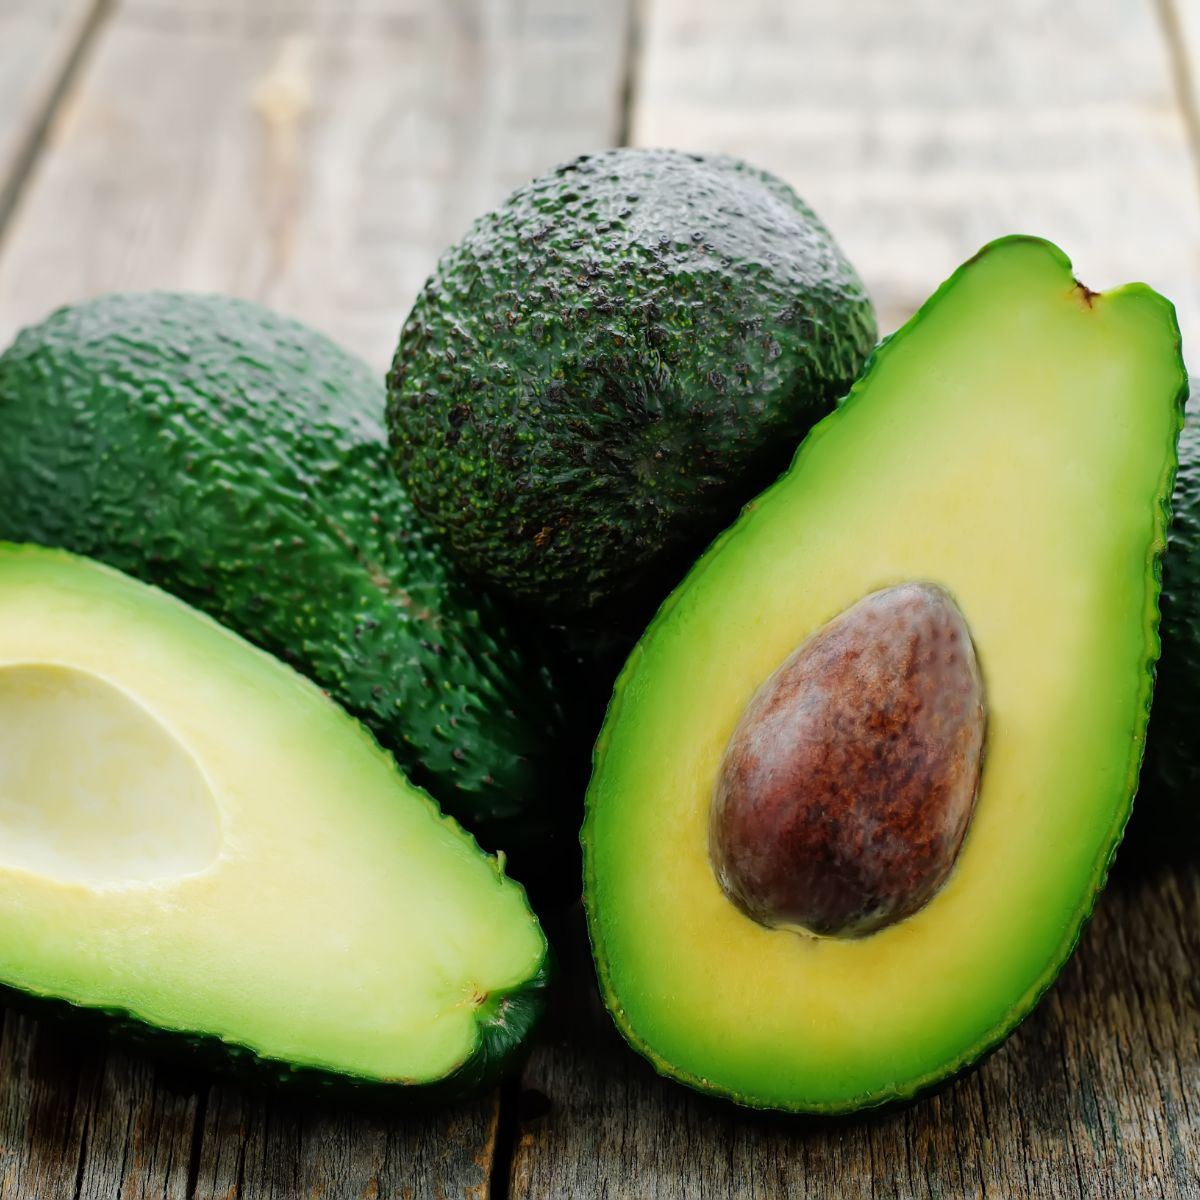 Benefits Of Avocado For Hair